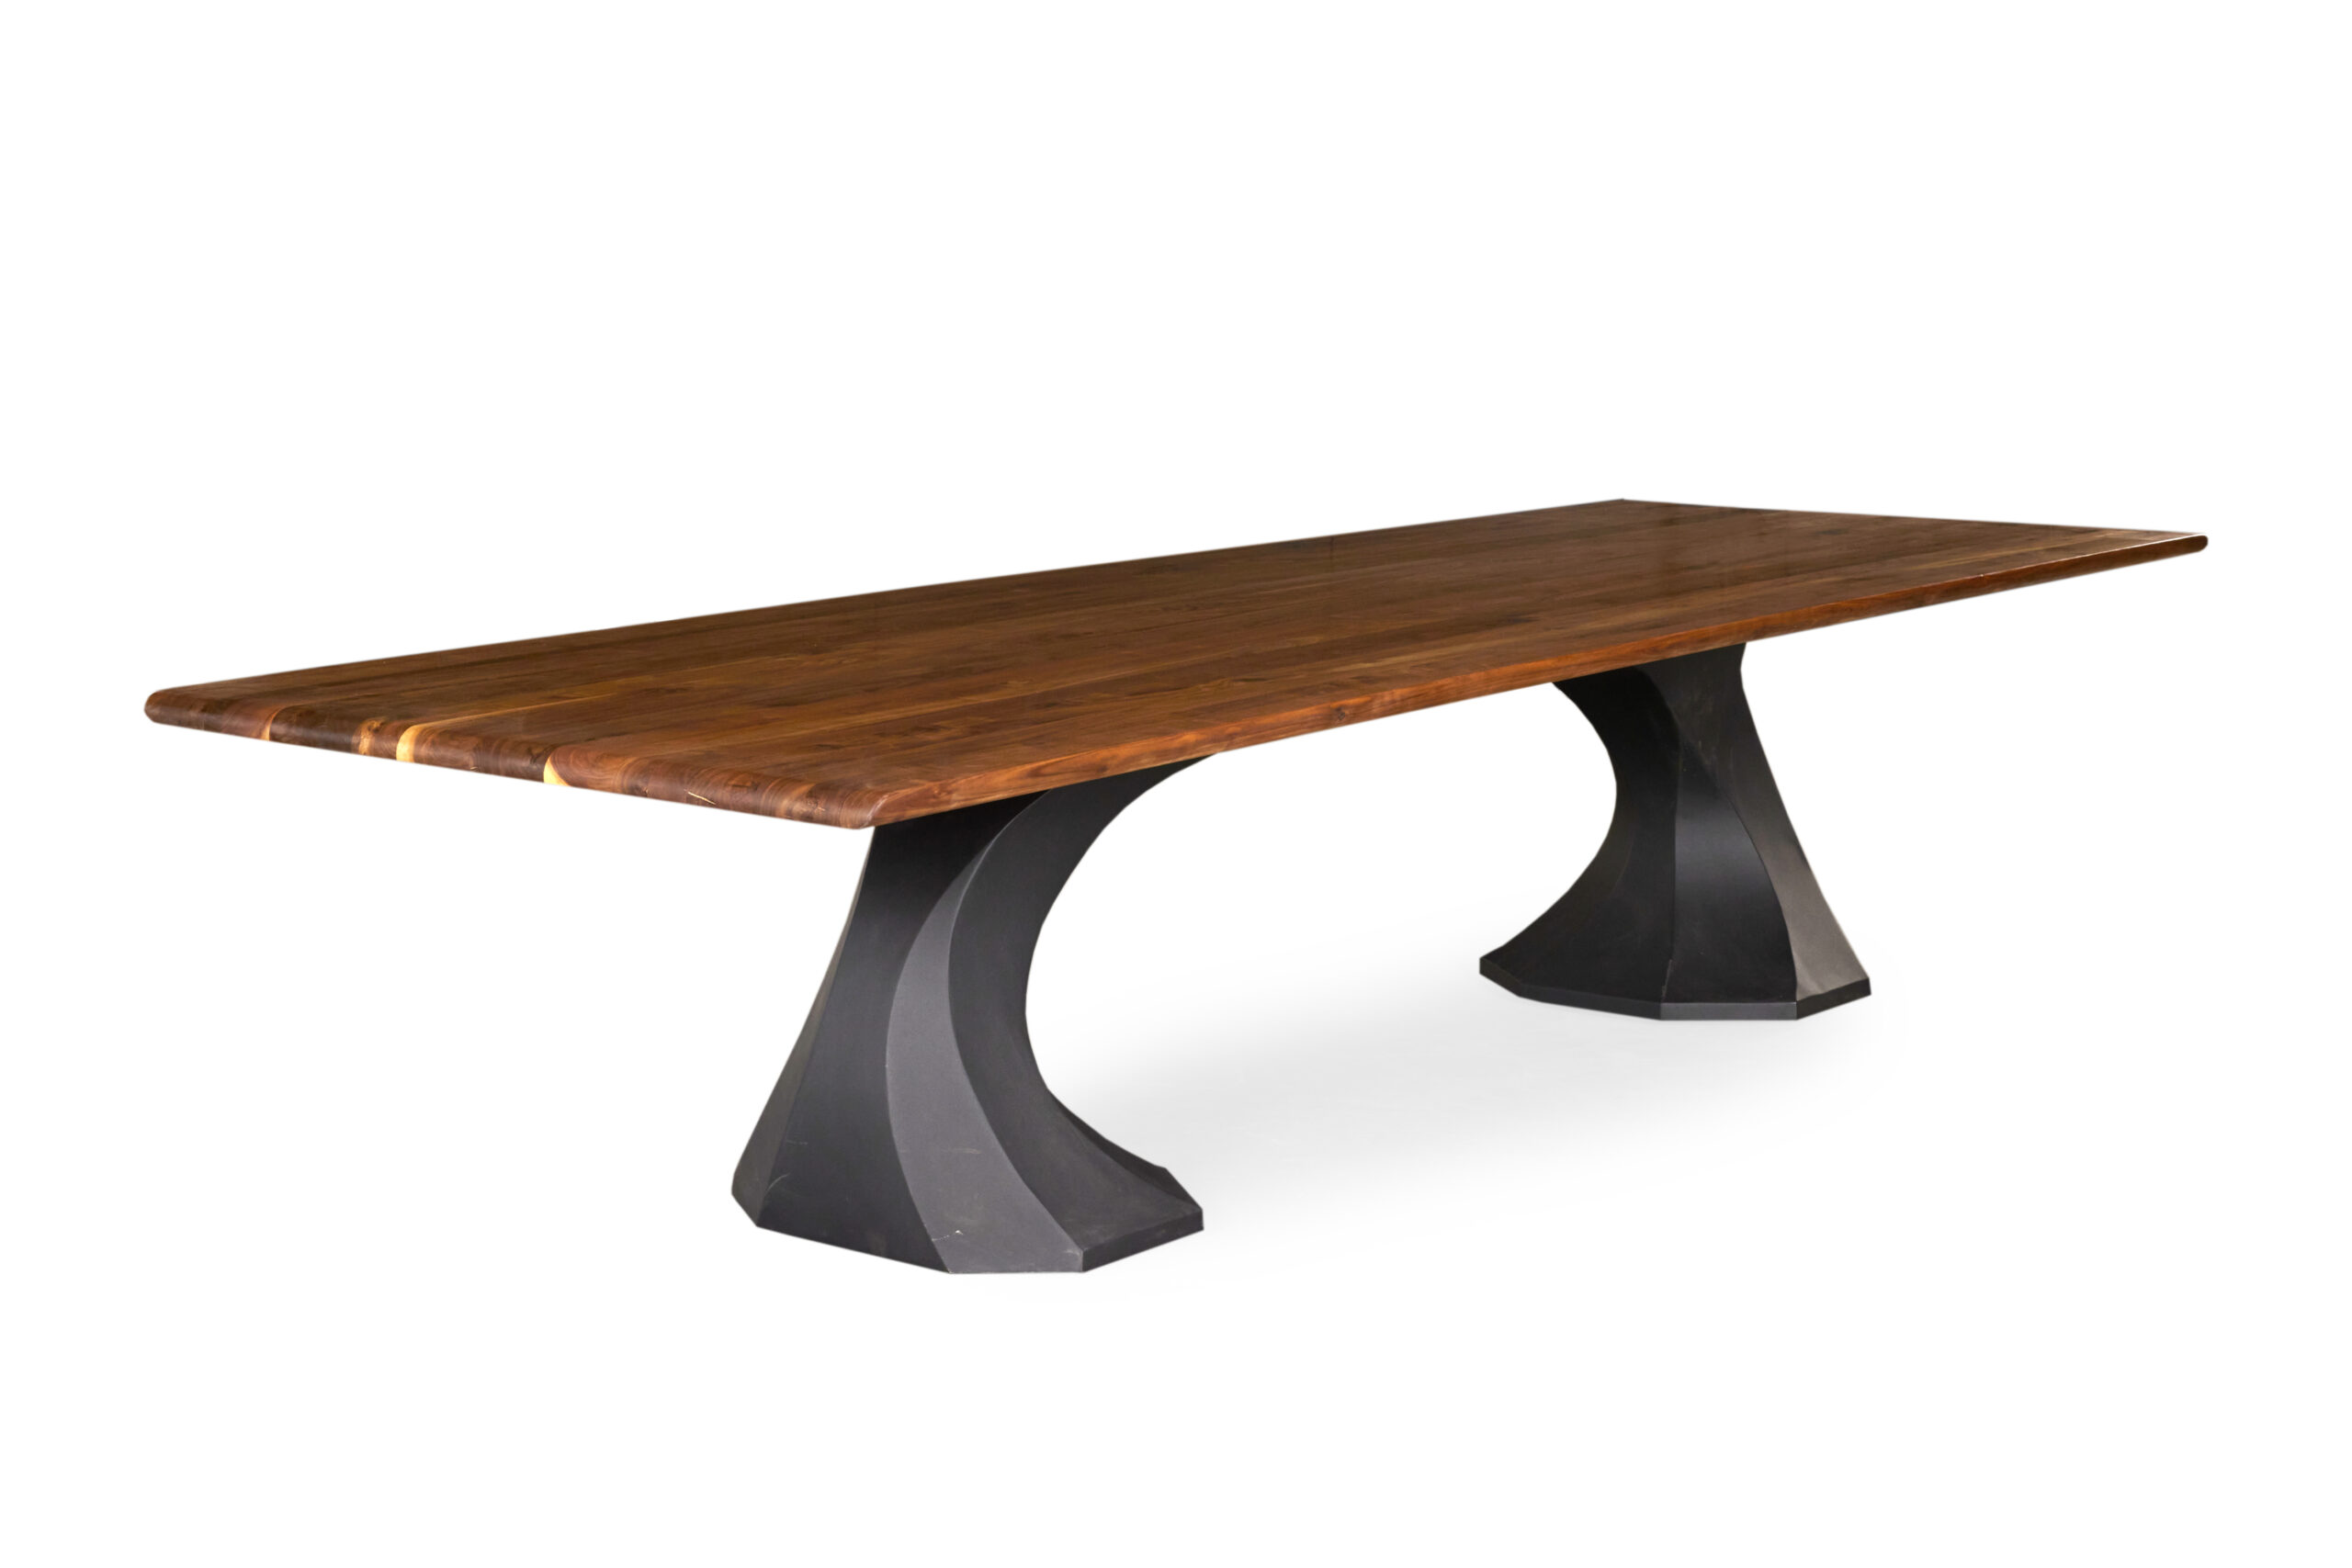 Luxe Dining Table: Walnut timber, dimensions L: 3600mm x W: 1200mm x H: 750mm, Elsternwick edge, natural oil finish, supported by Positano Leg Steel base." This alt text succinctly describes the key features of the table.